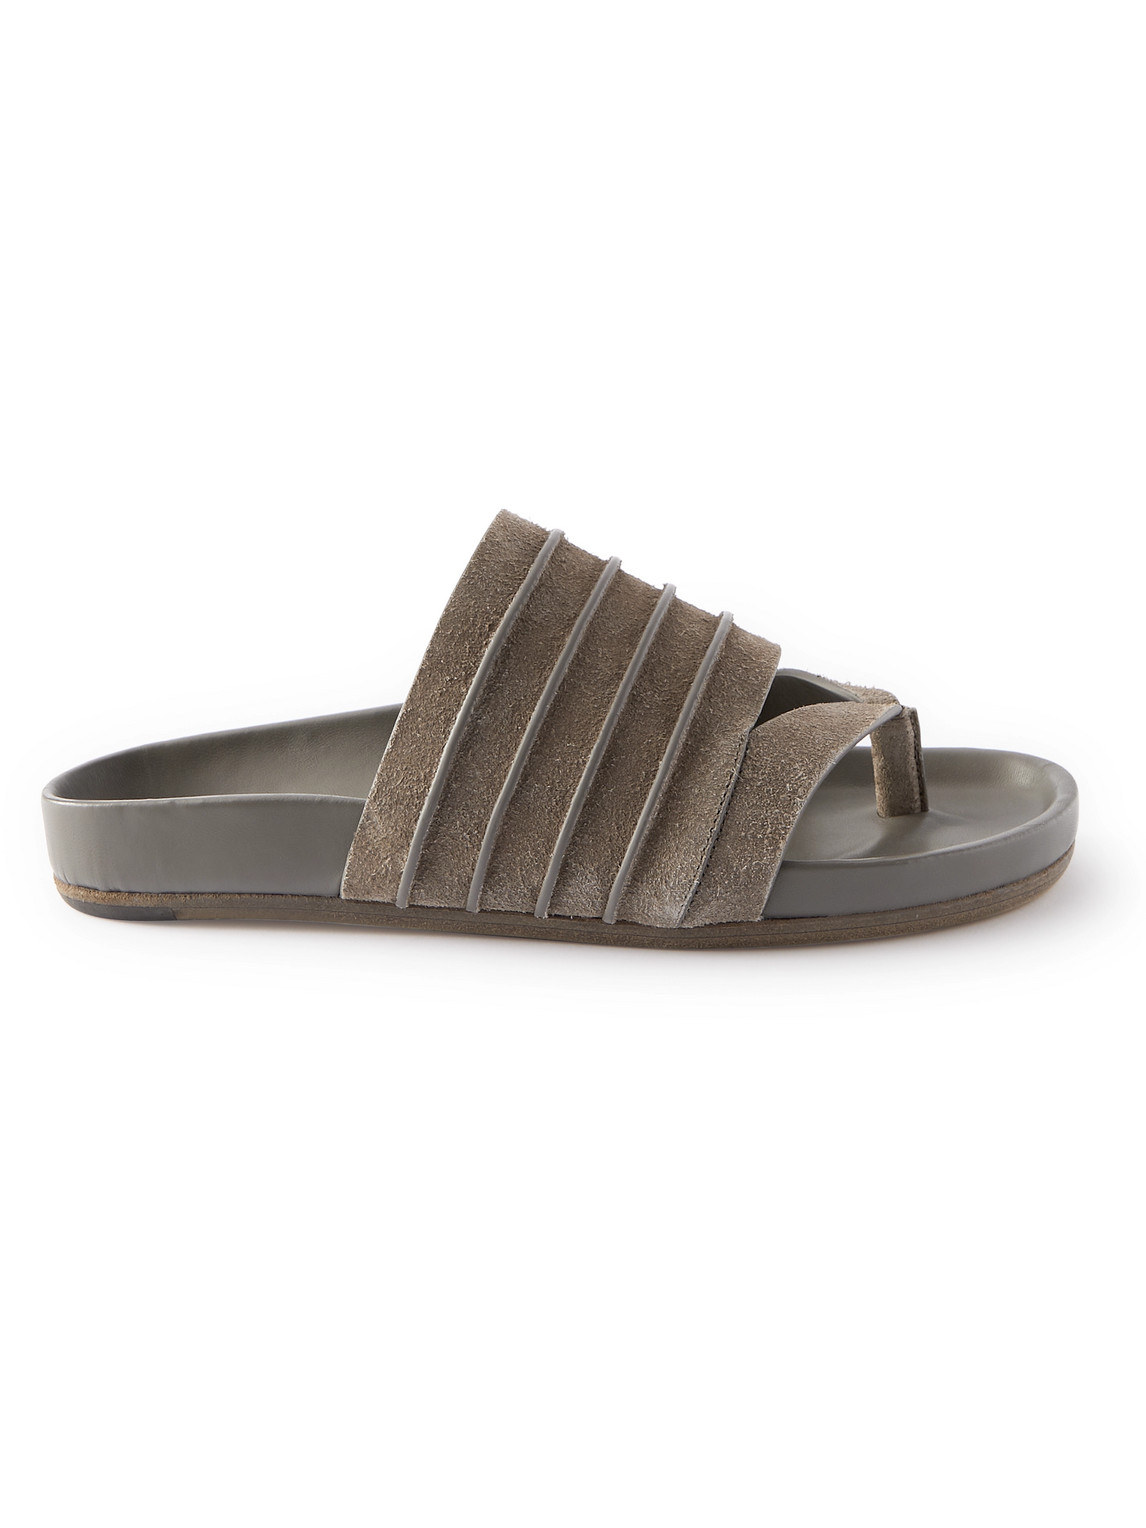 Ruhlmann Granola Ribbed Suede-Trimmed Leather Sandals